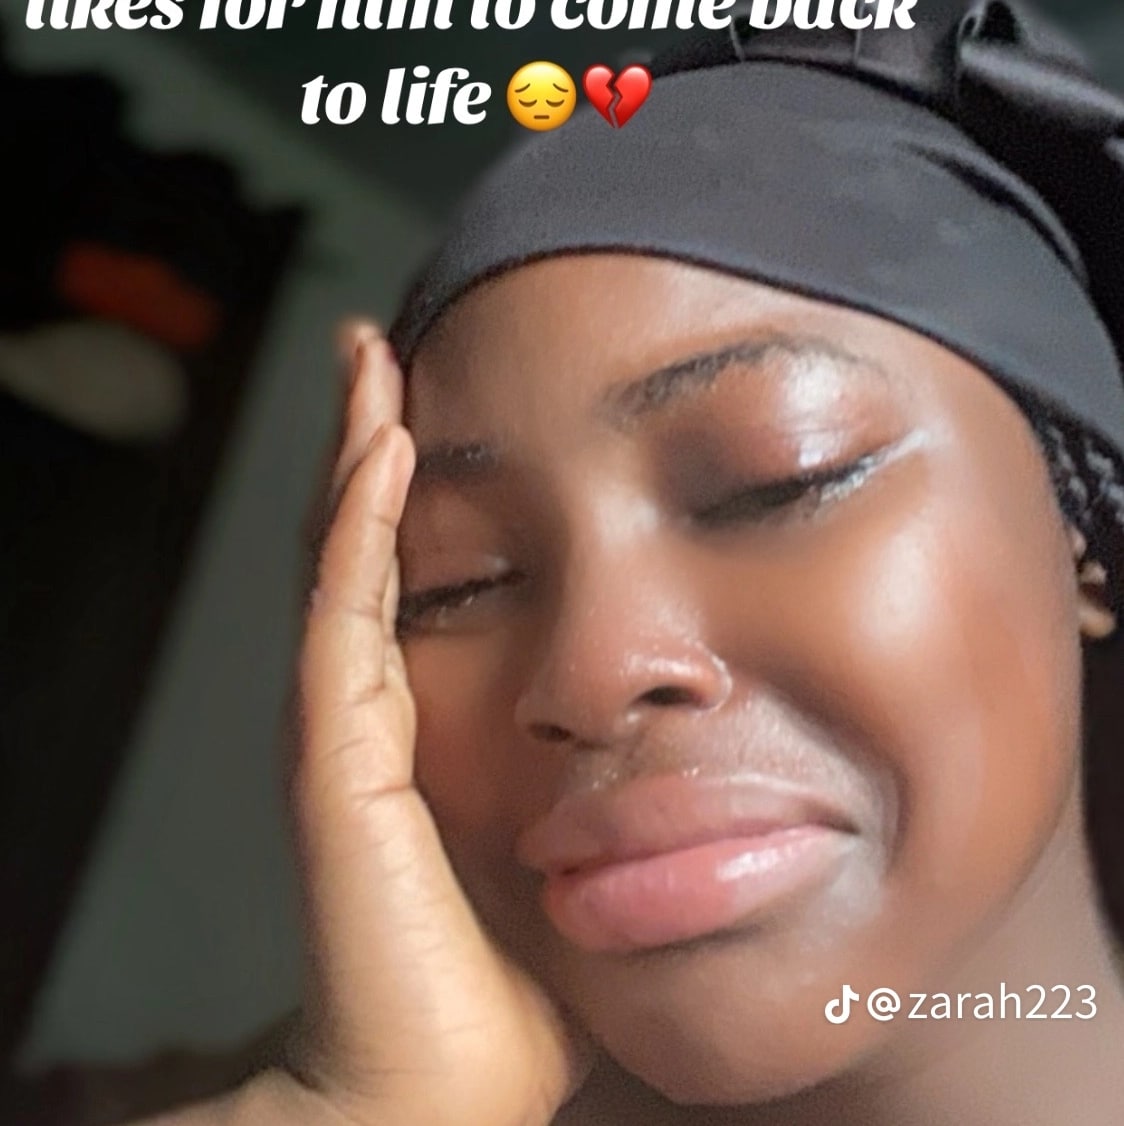 Video of Nigerian lady asking late friend for likes to return to life goes viral